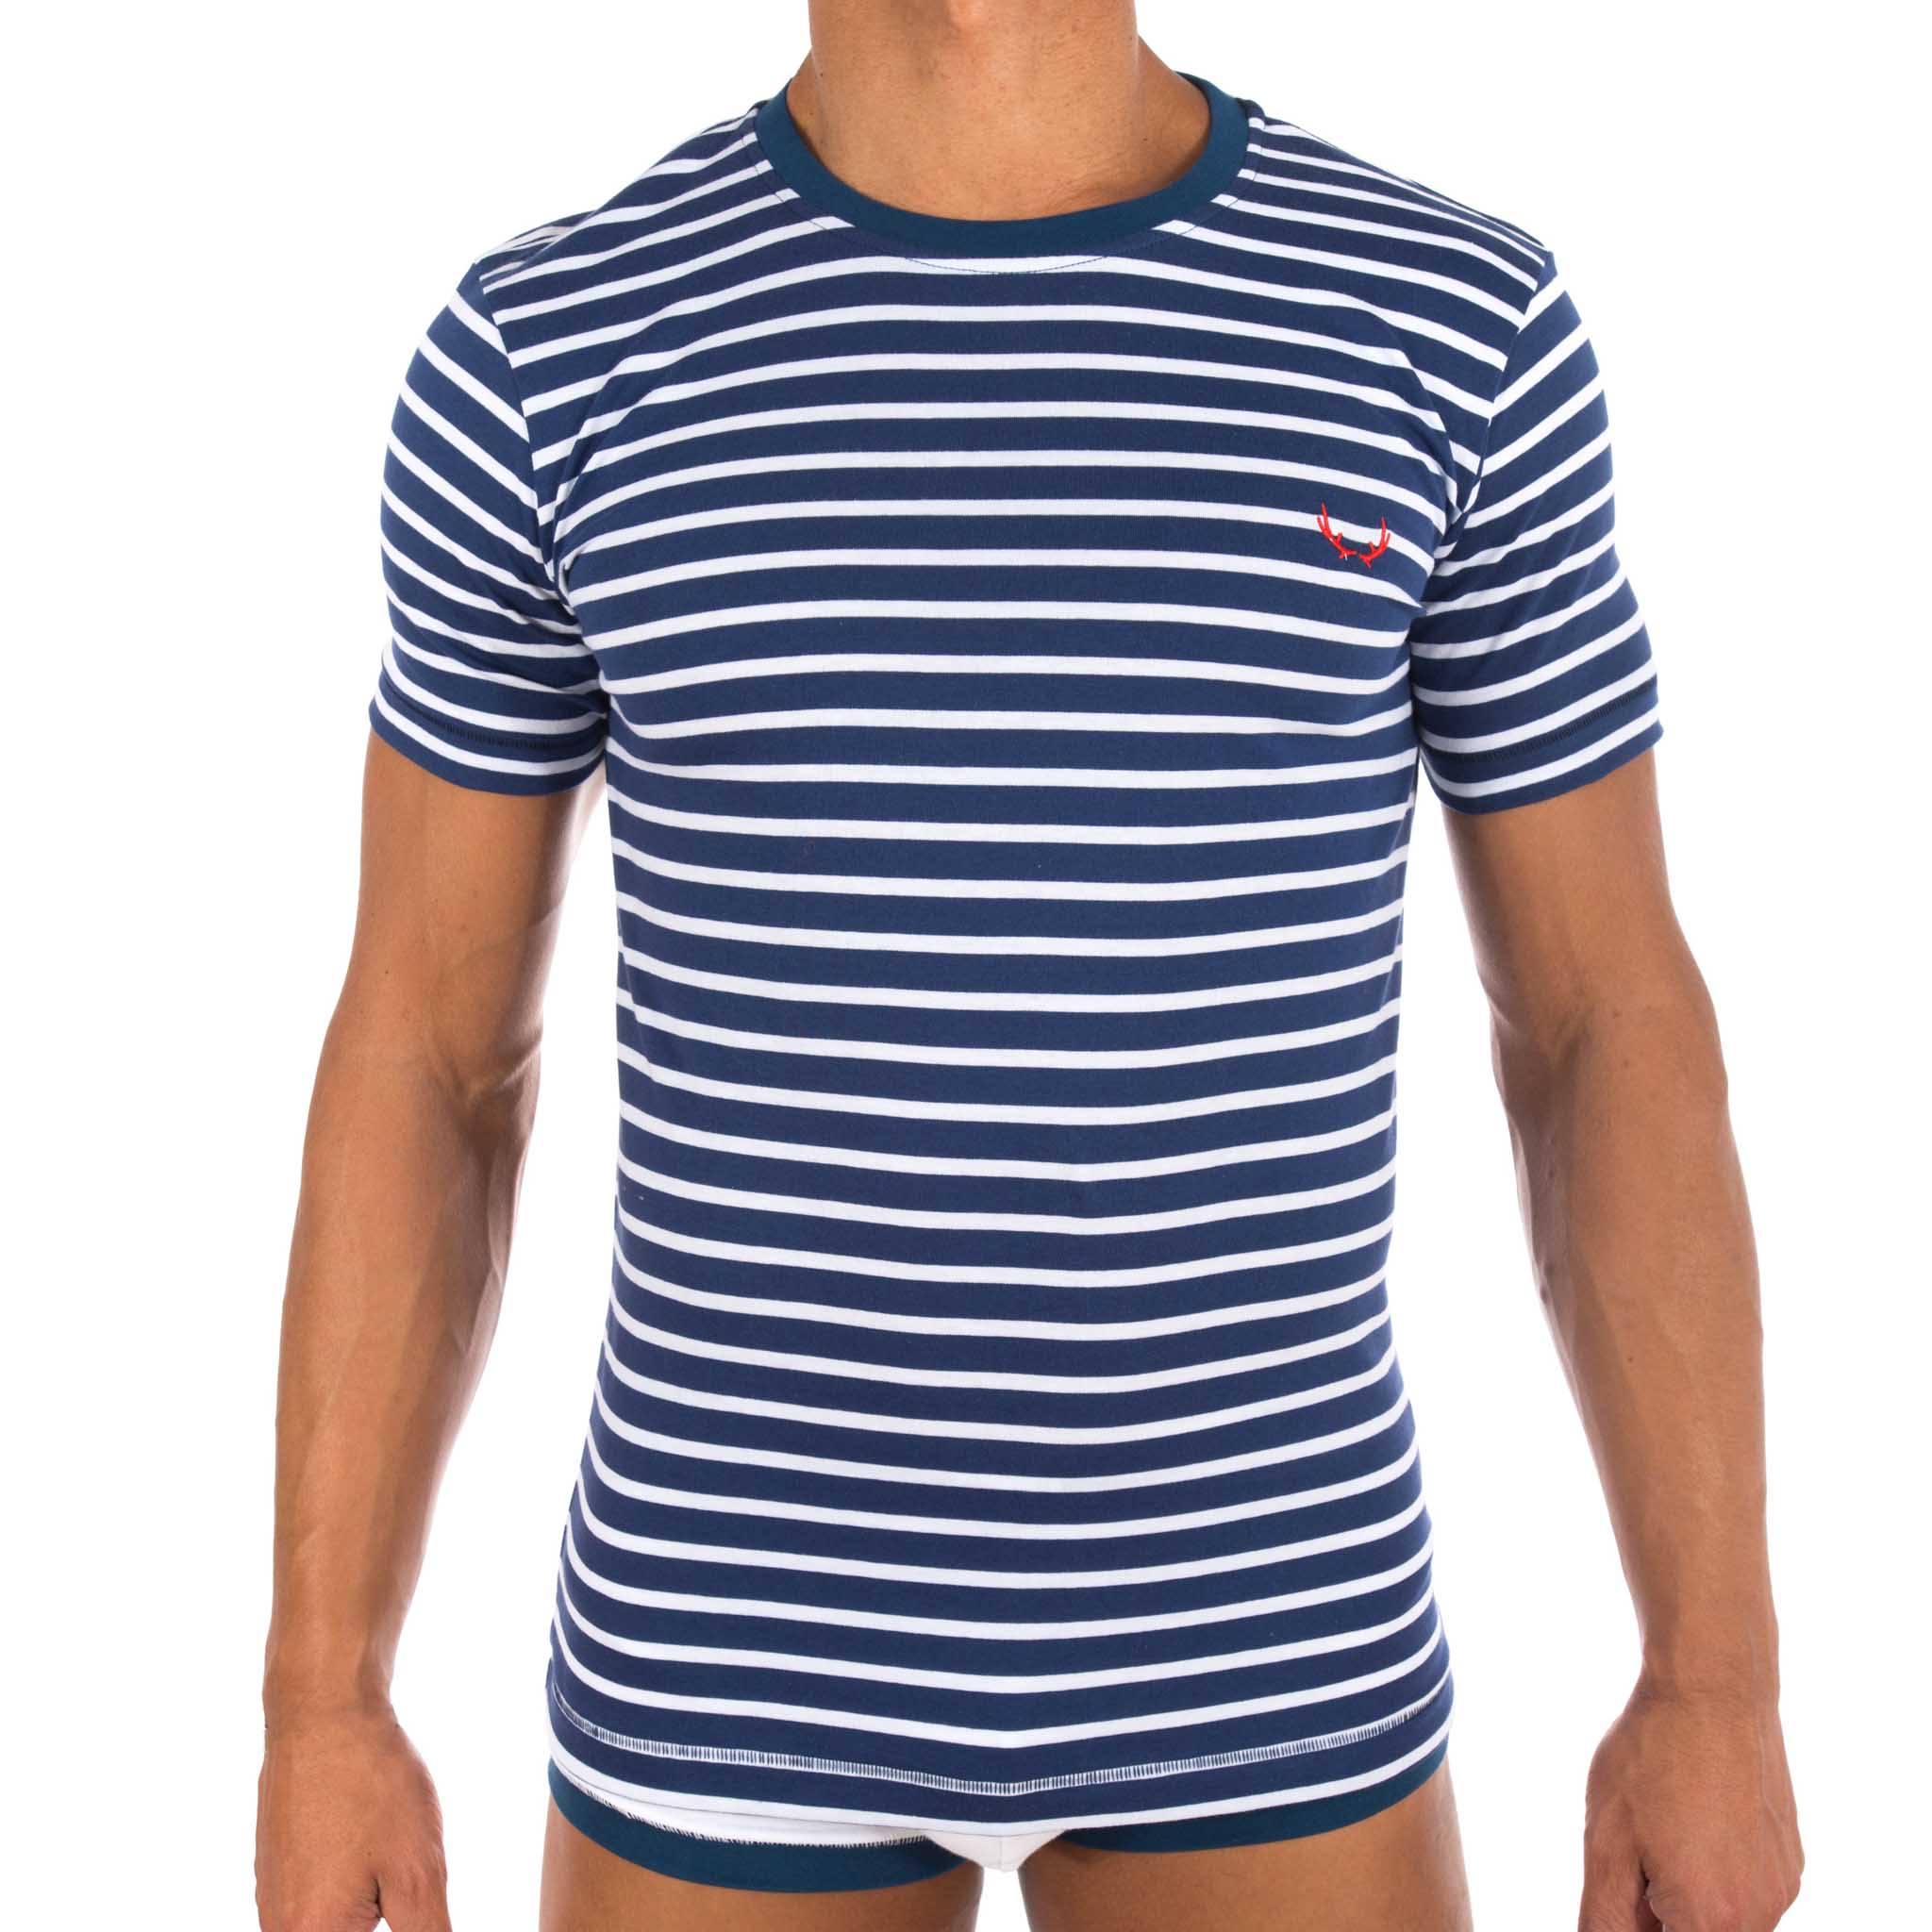 Blue and white striped t-shirt made of organic cotton from Bluebuck